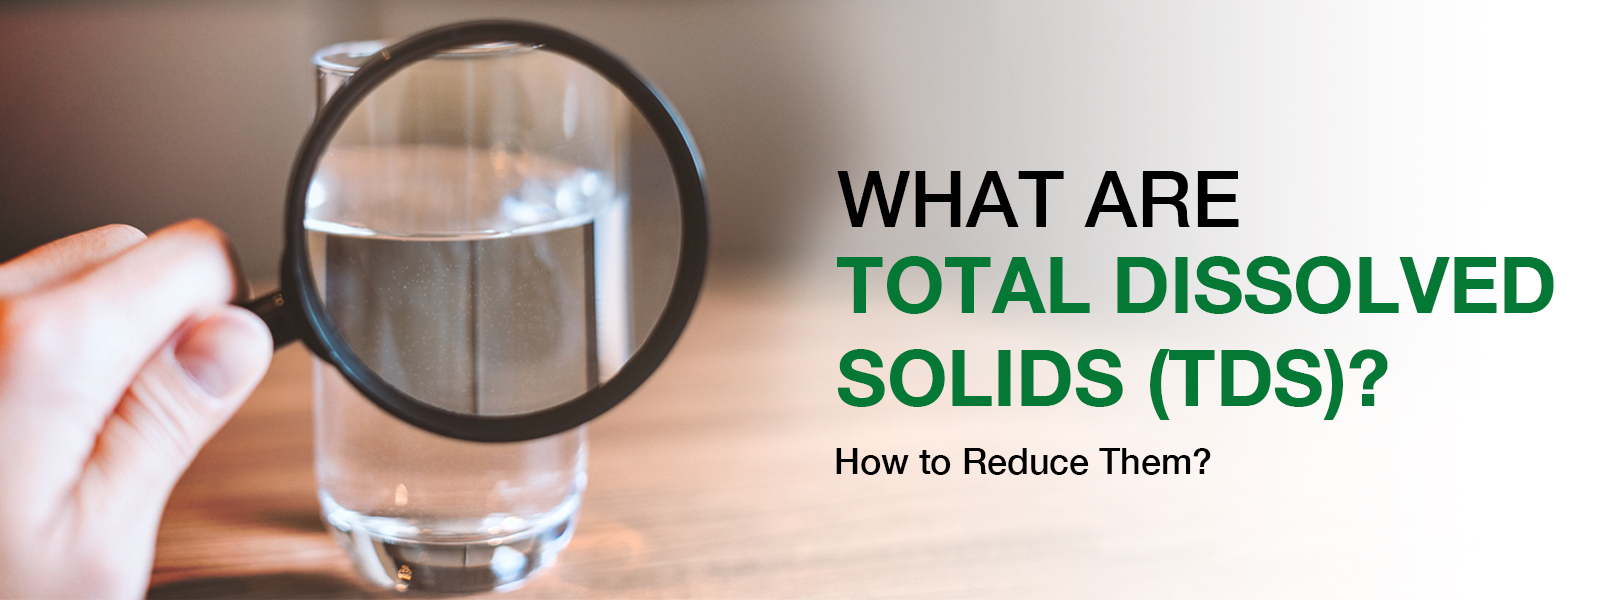 What are Total Dissolved Solids (TDS)? How to reduce them?